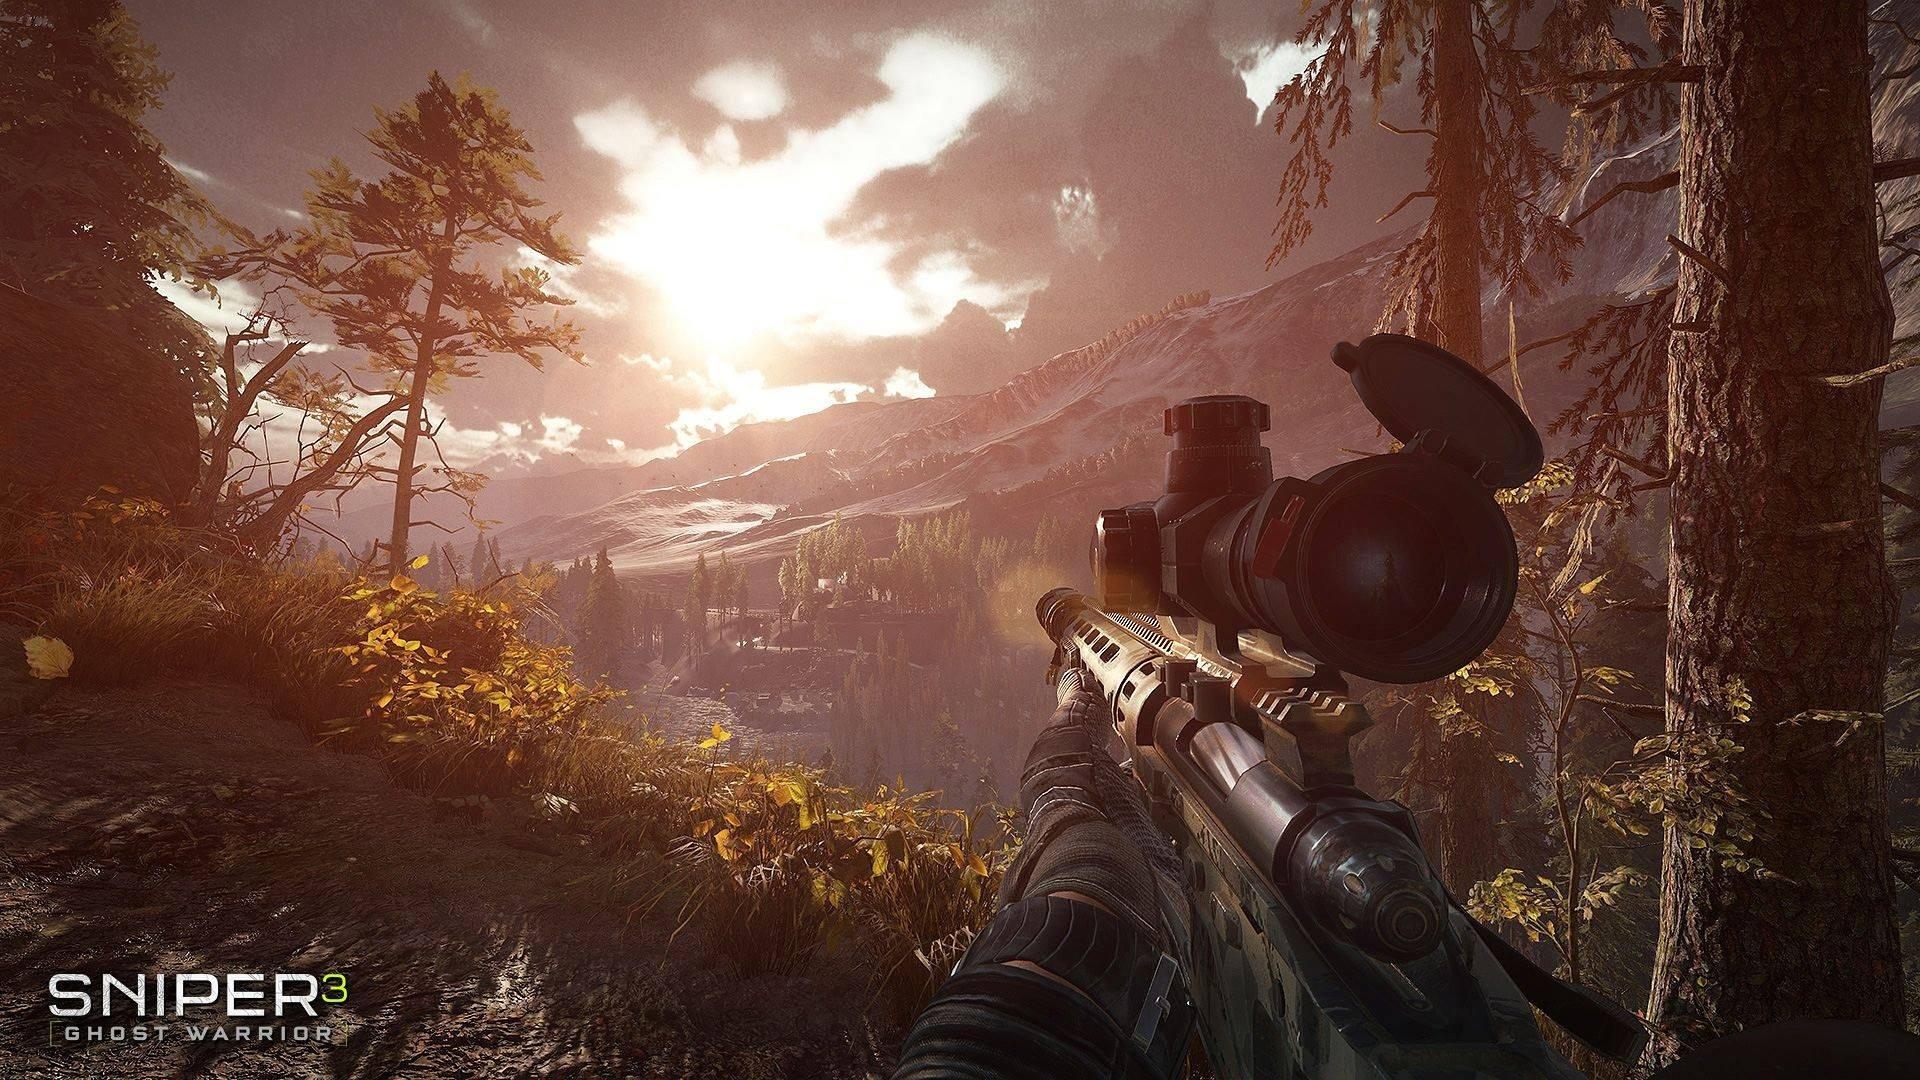 Sniper: Ghost Warrior 3 Has a 27 km² Game World, Will Last